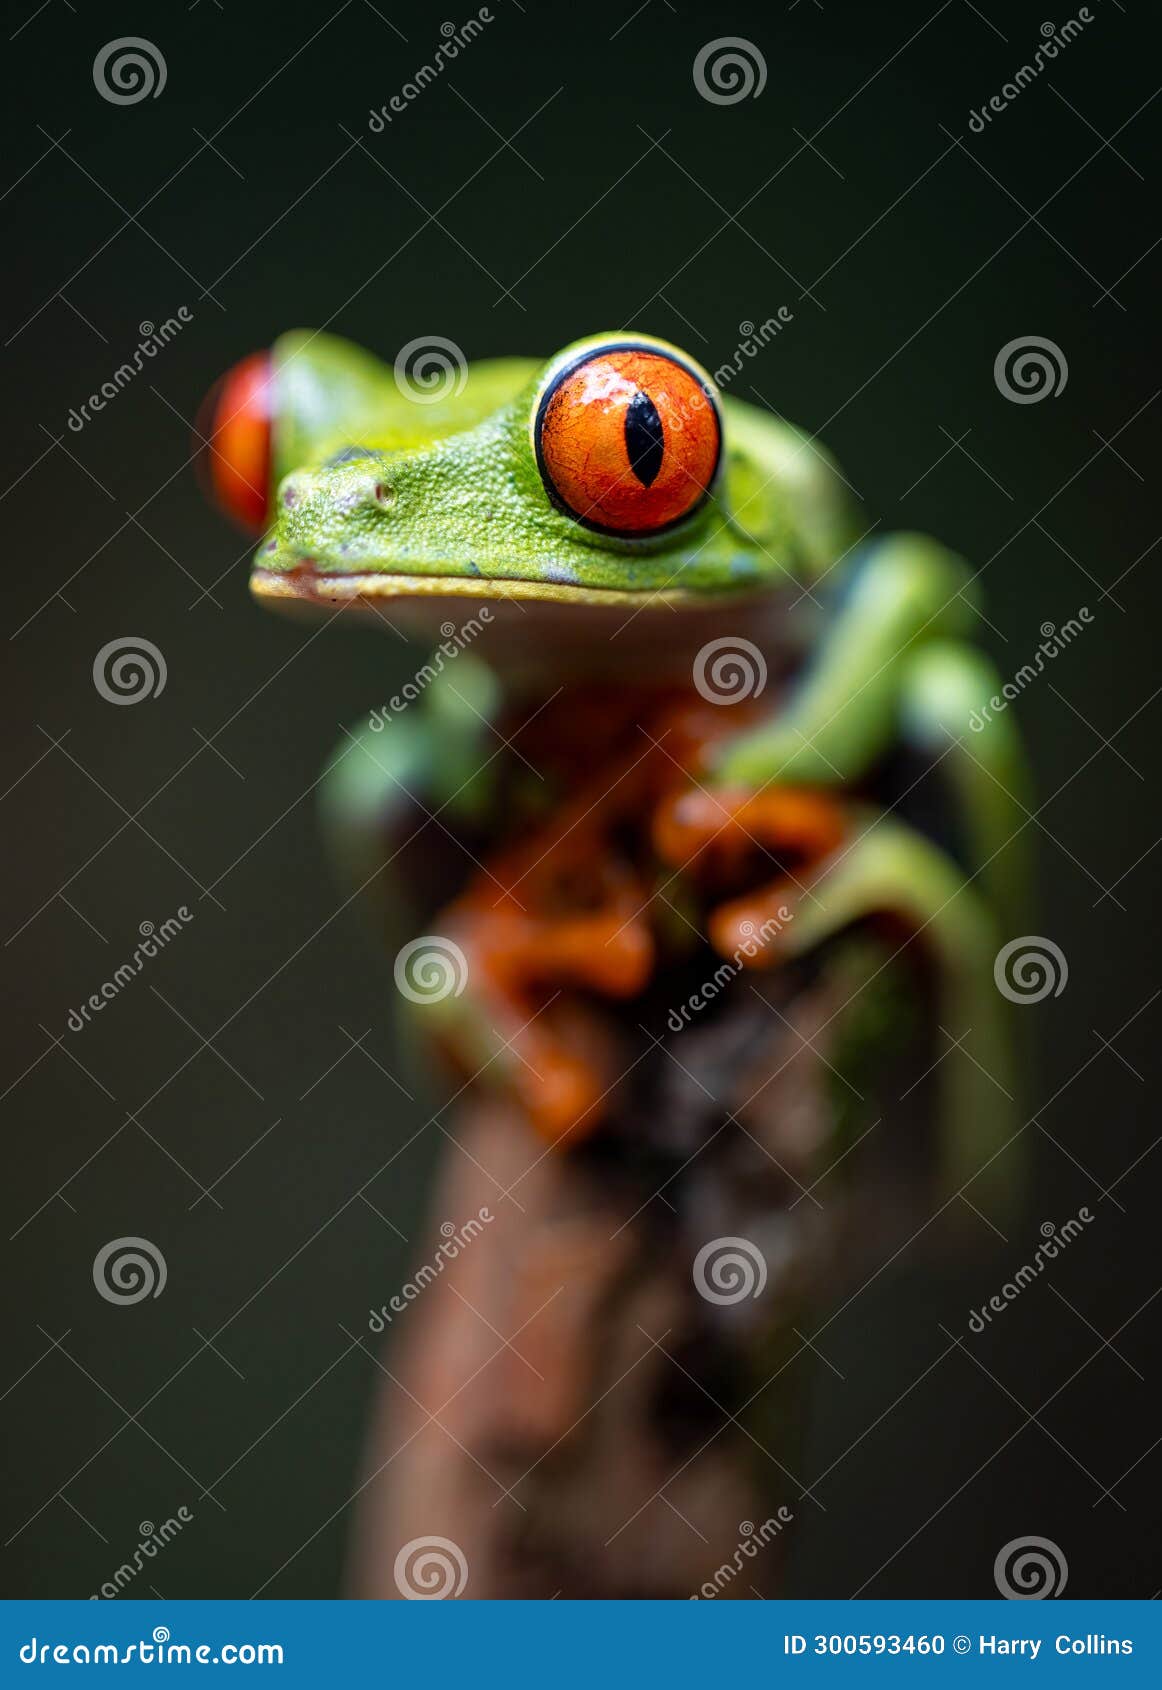 Red-eyed Tree Frog in Costa Rica. A red-eyed tree frog in the rainforest of Costa Rica.